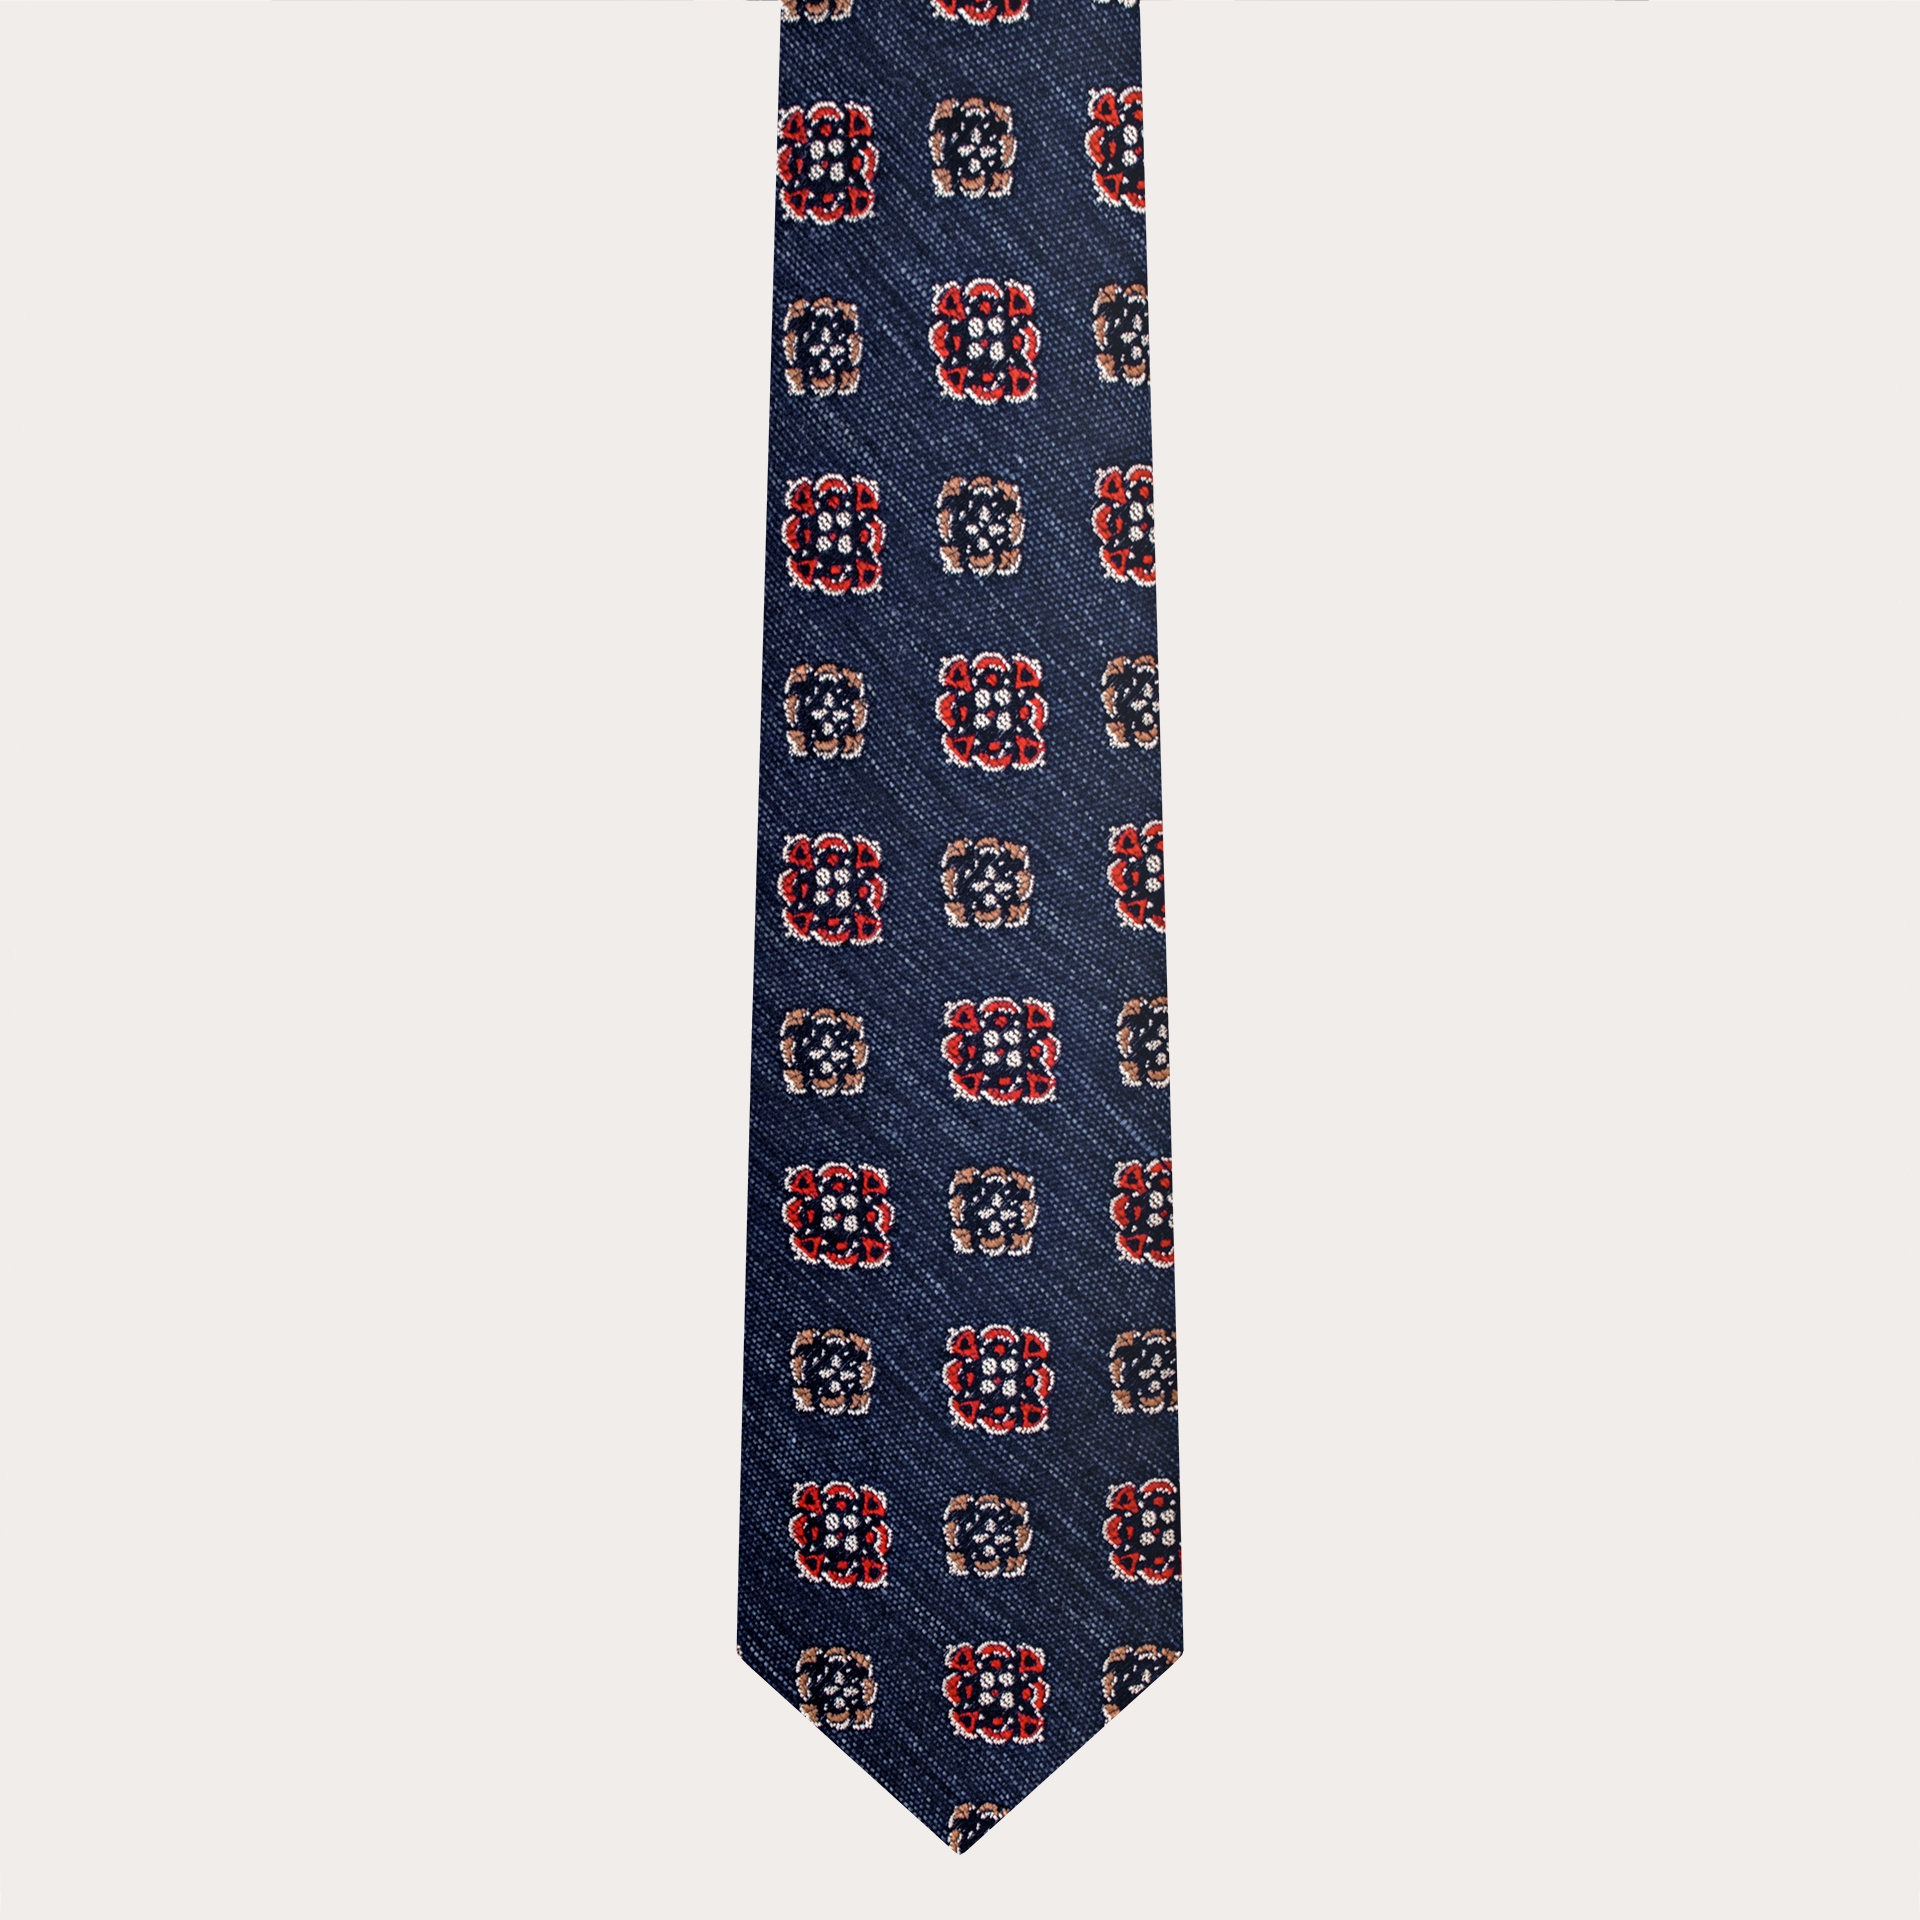 BRUCLE Silk and cotton necktie, denim pattern with geometric flowers